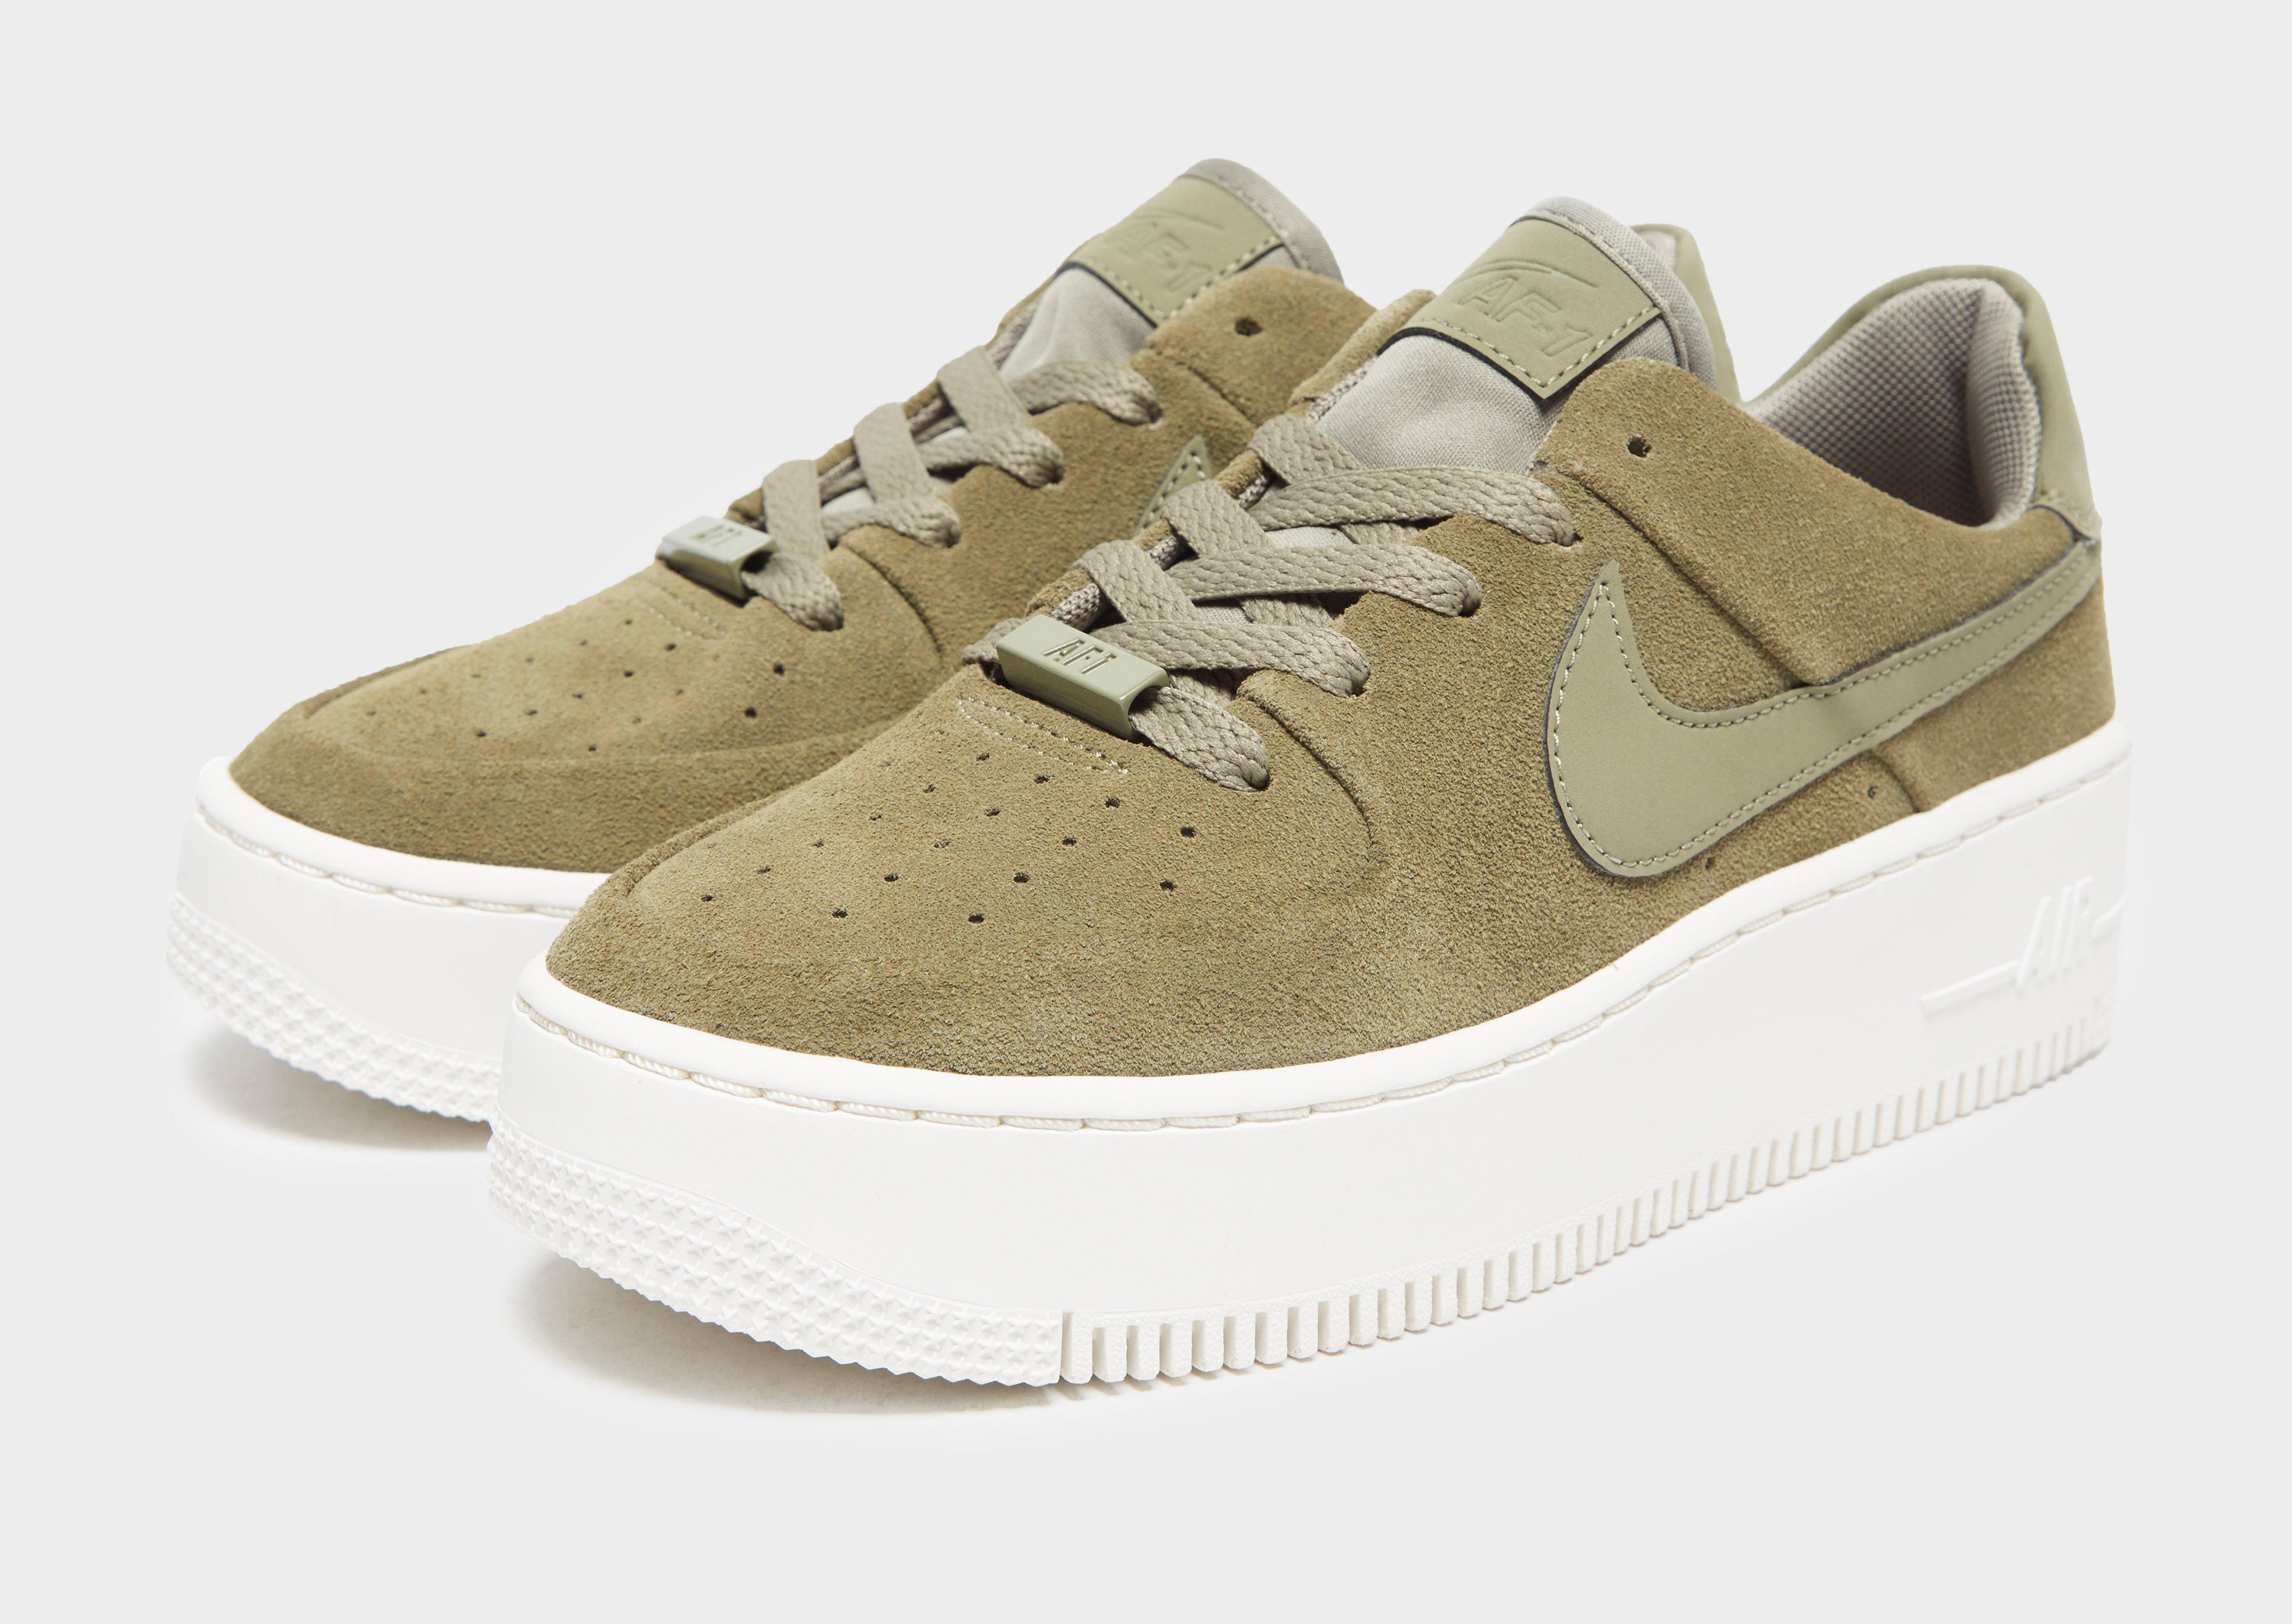 nike olive verde air force 1 reduced 08c37 75285